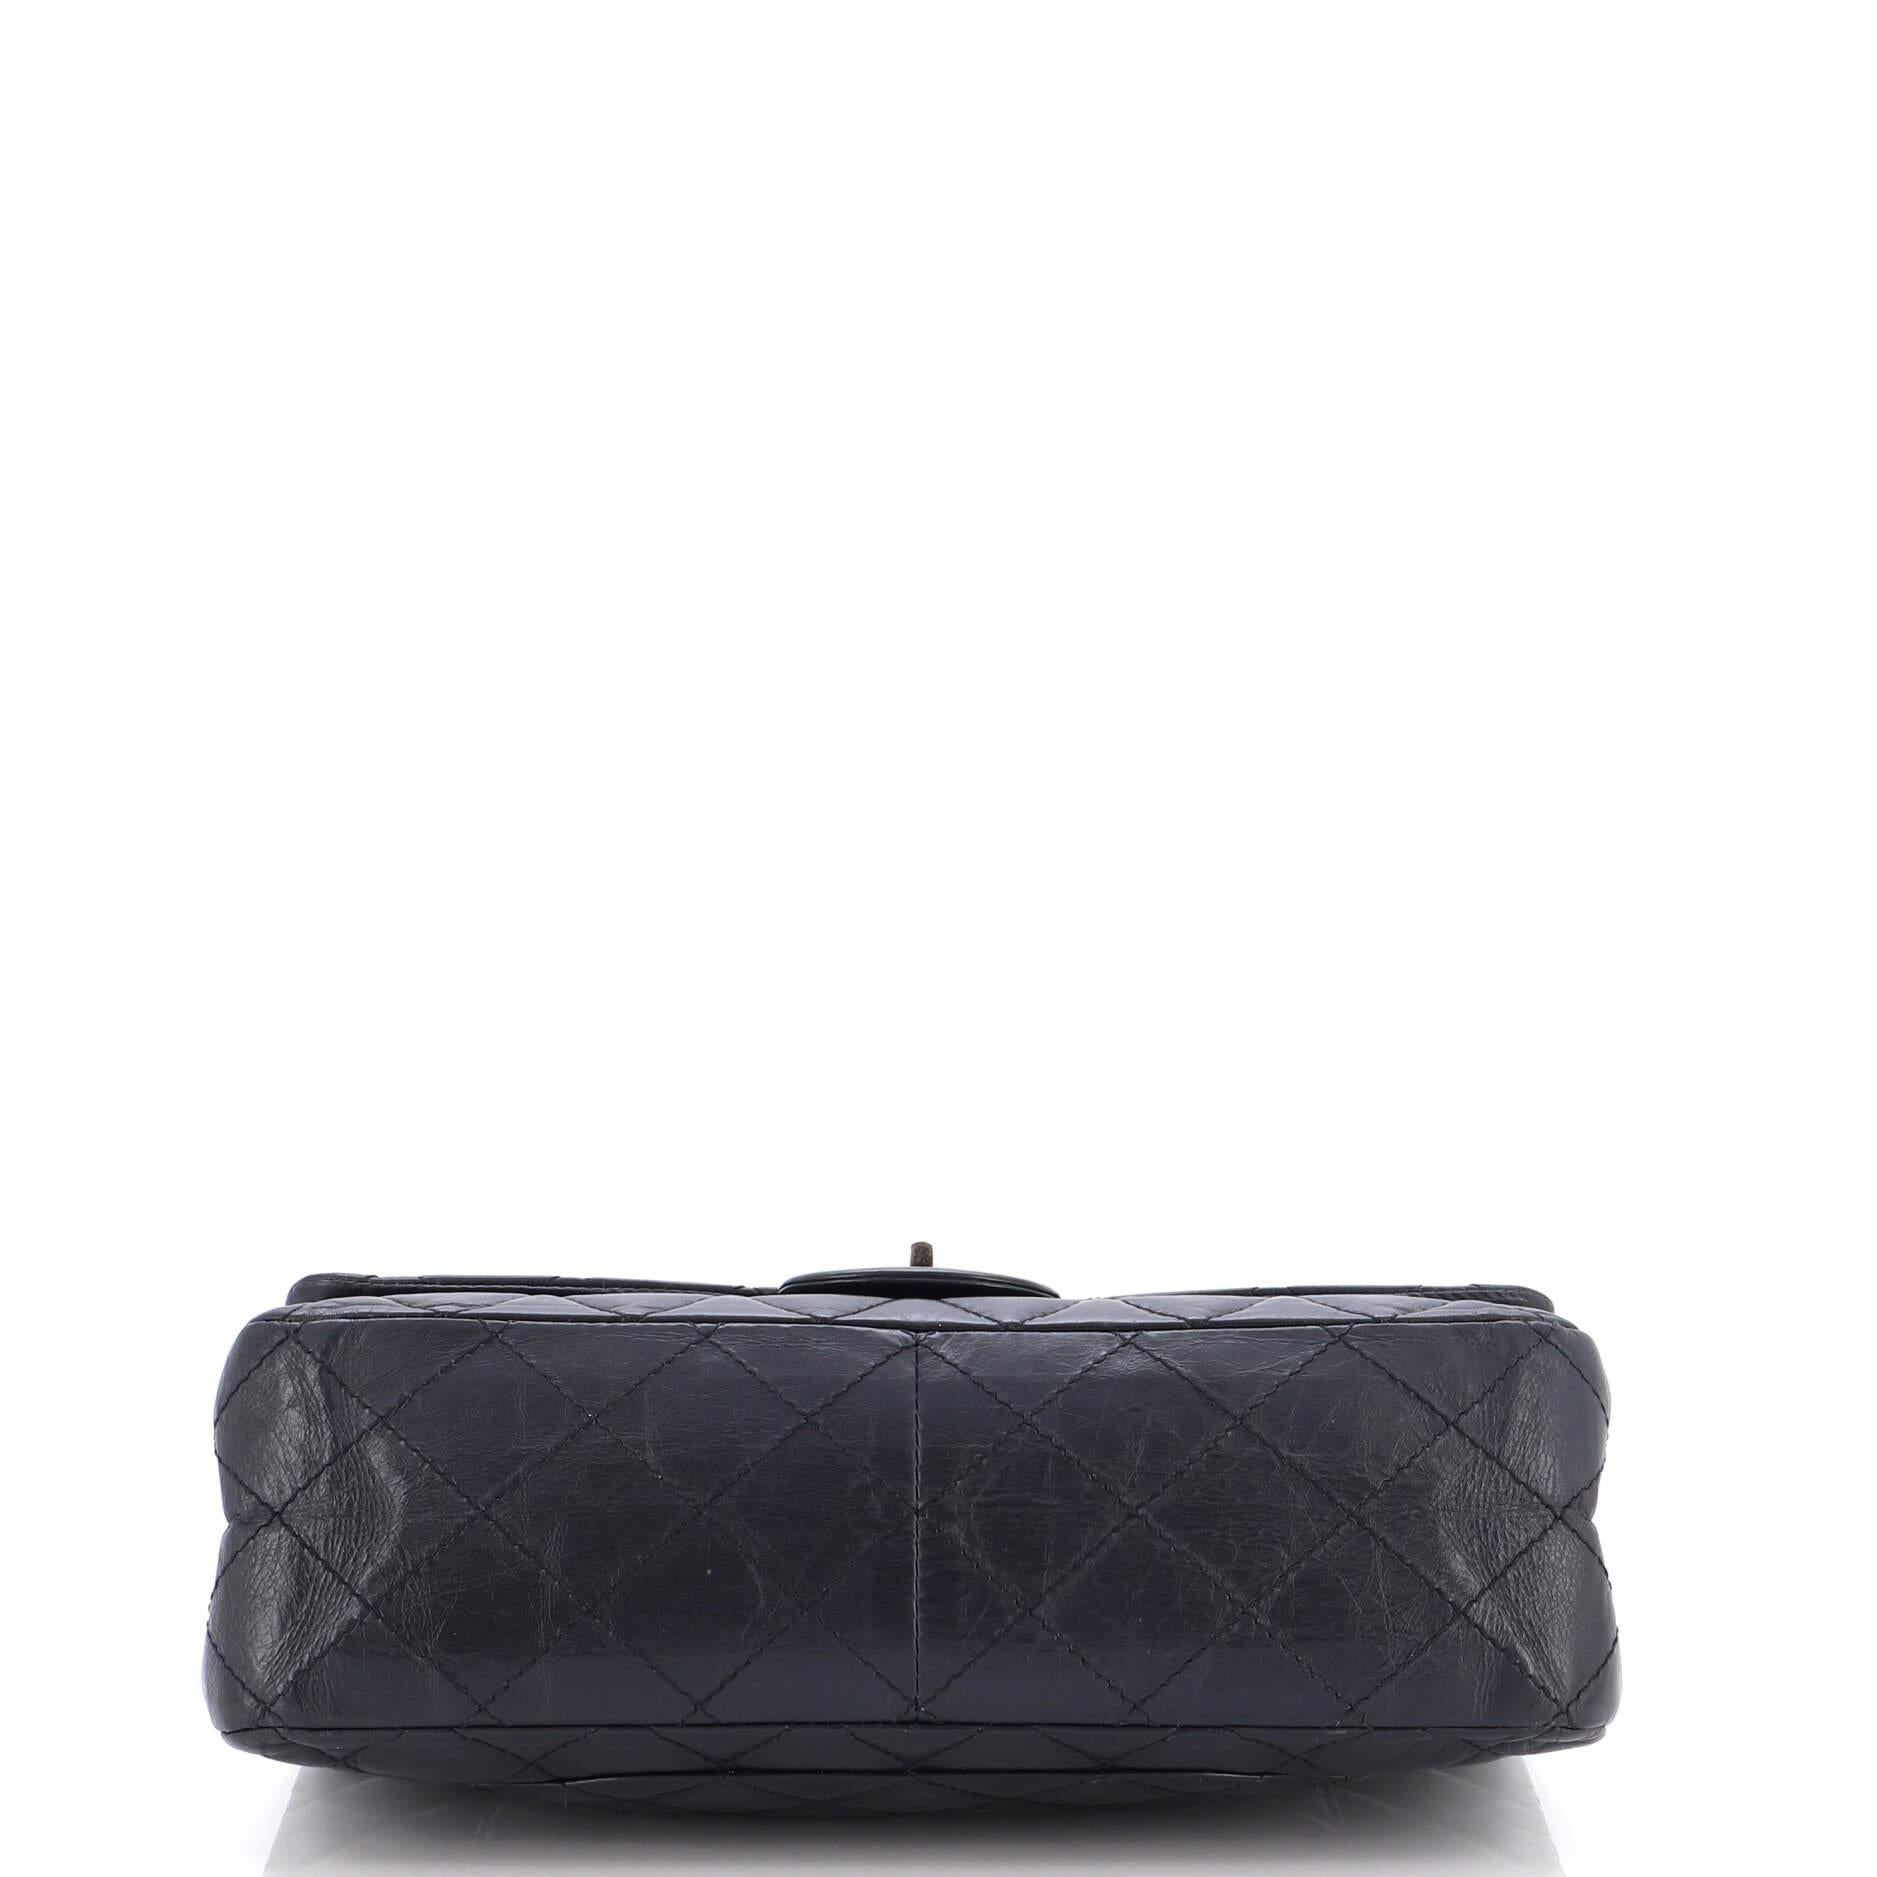 Chanel Reissue 2.55 Flap Bag Quilted Aged Calfskin 227 1